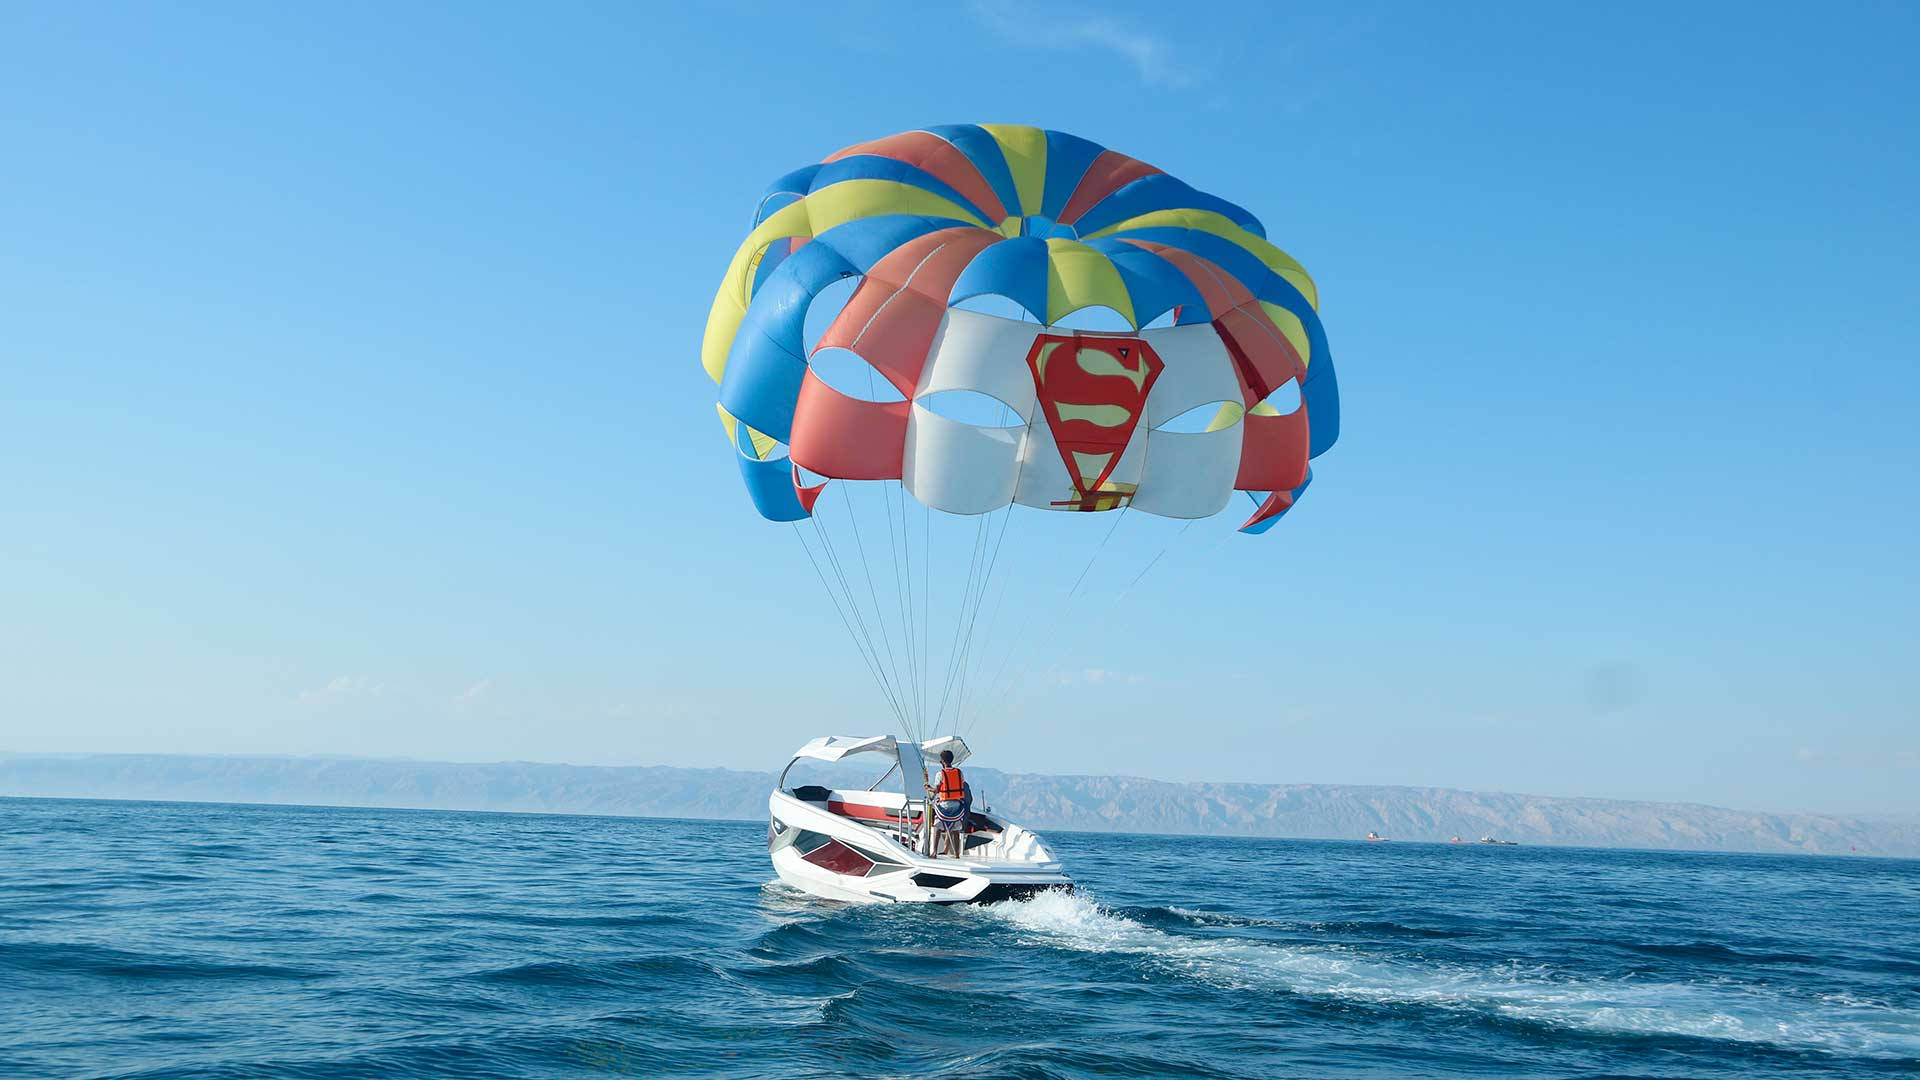 Parasailing Adventure in Prism Blue Waters Wallpaper